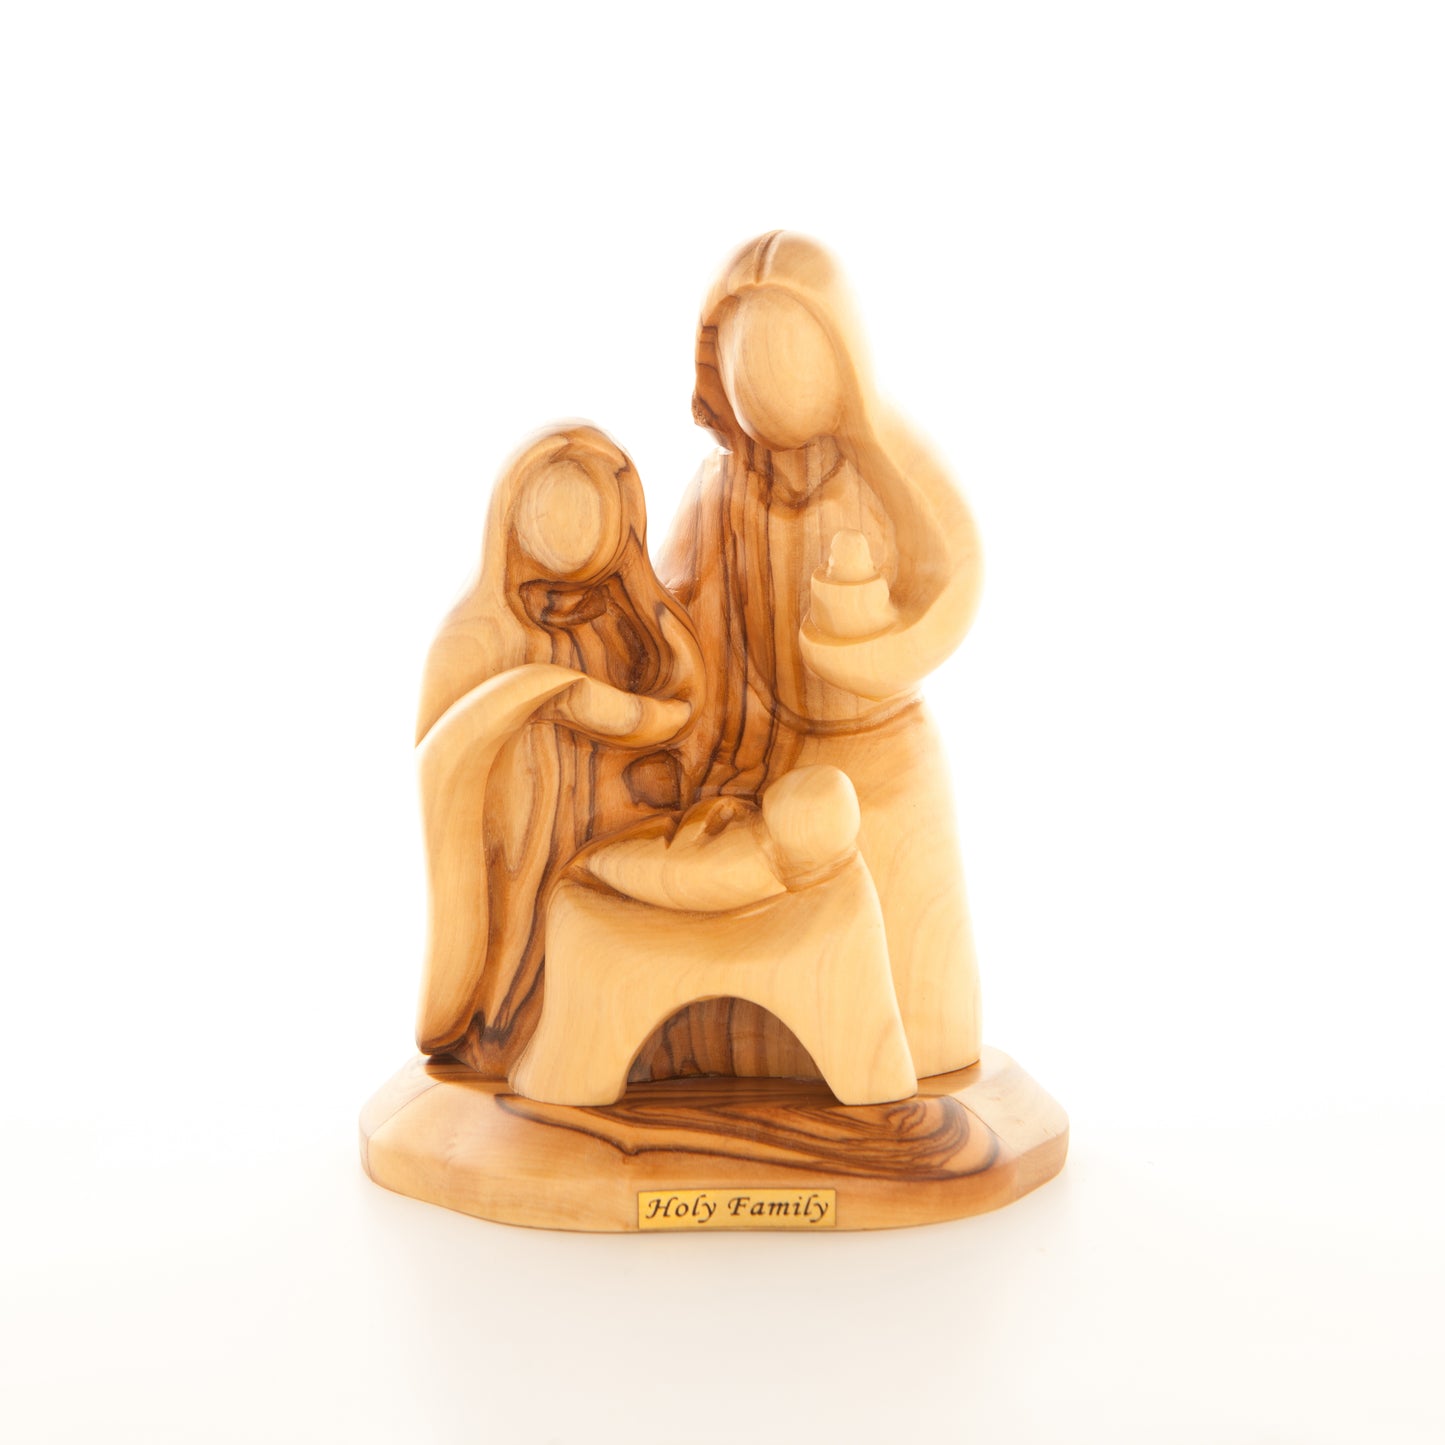 Holy Family Wooden Carved Figurine, 6.1"